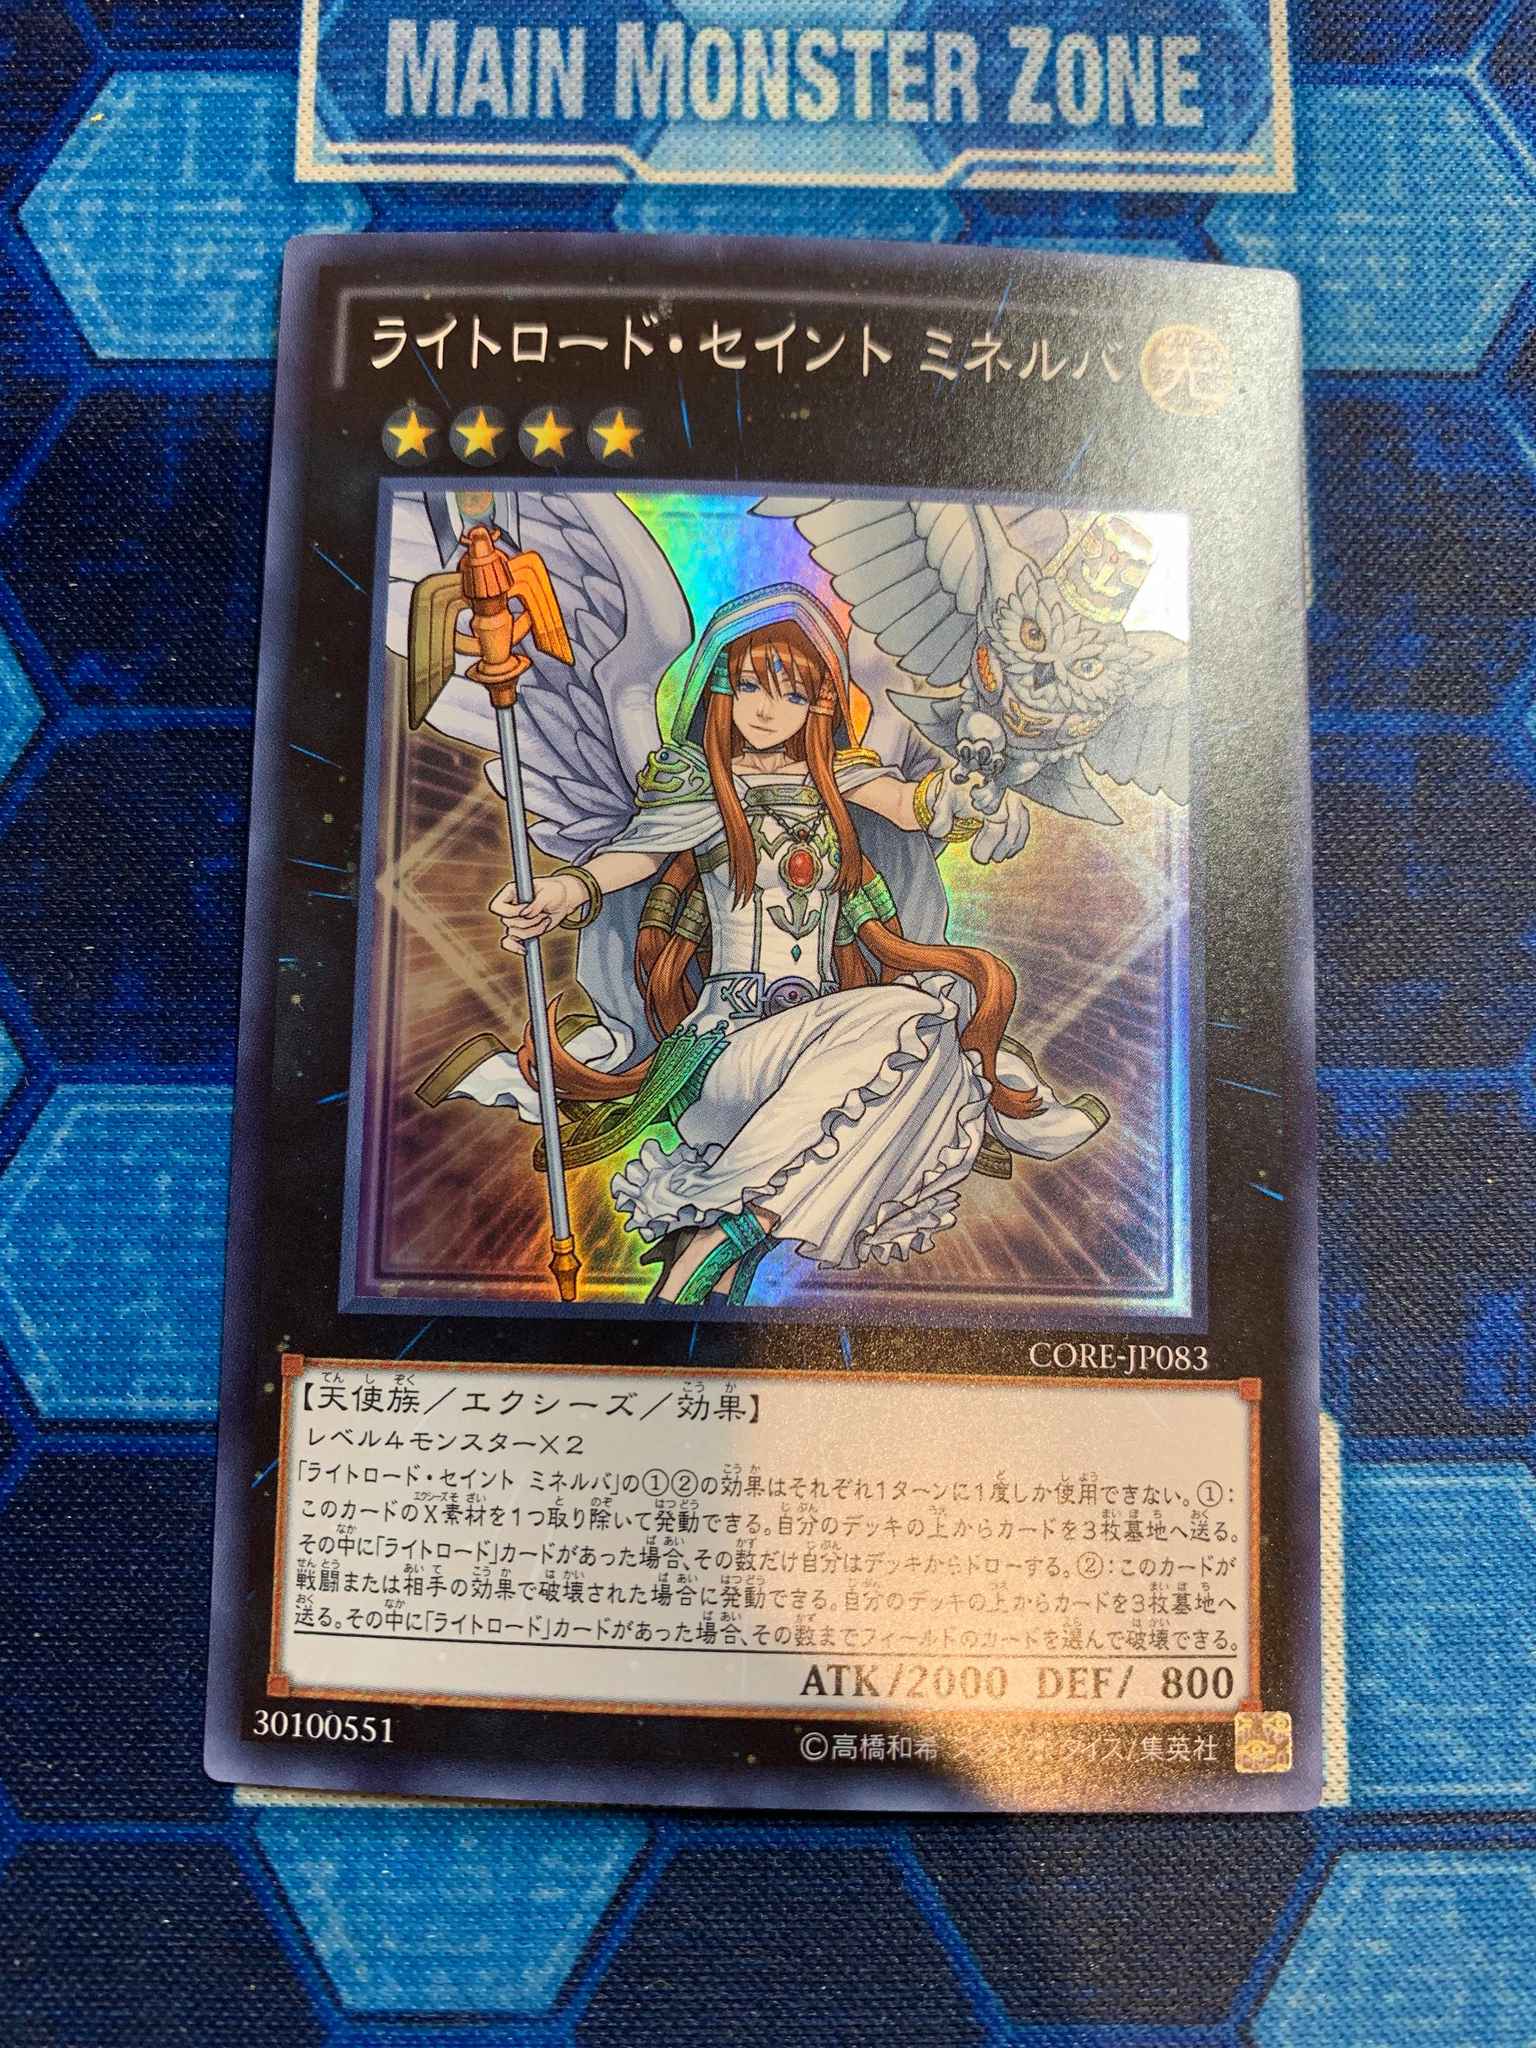 Ocg Minerva The Exalted Lightsworn Core Jp0 Super Rare Minerva The Exalted Lightsworn Super Rare Yu Gi Oh Championship Series Prize Cards Yugioh Online Gaming Store For Cards Miniatures Singles Packs